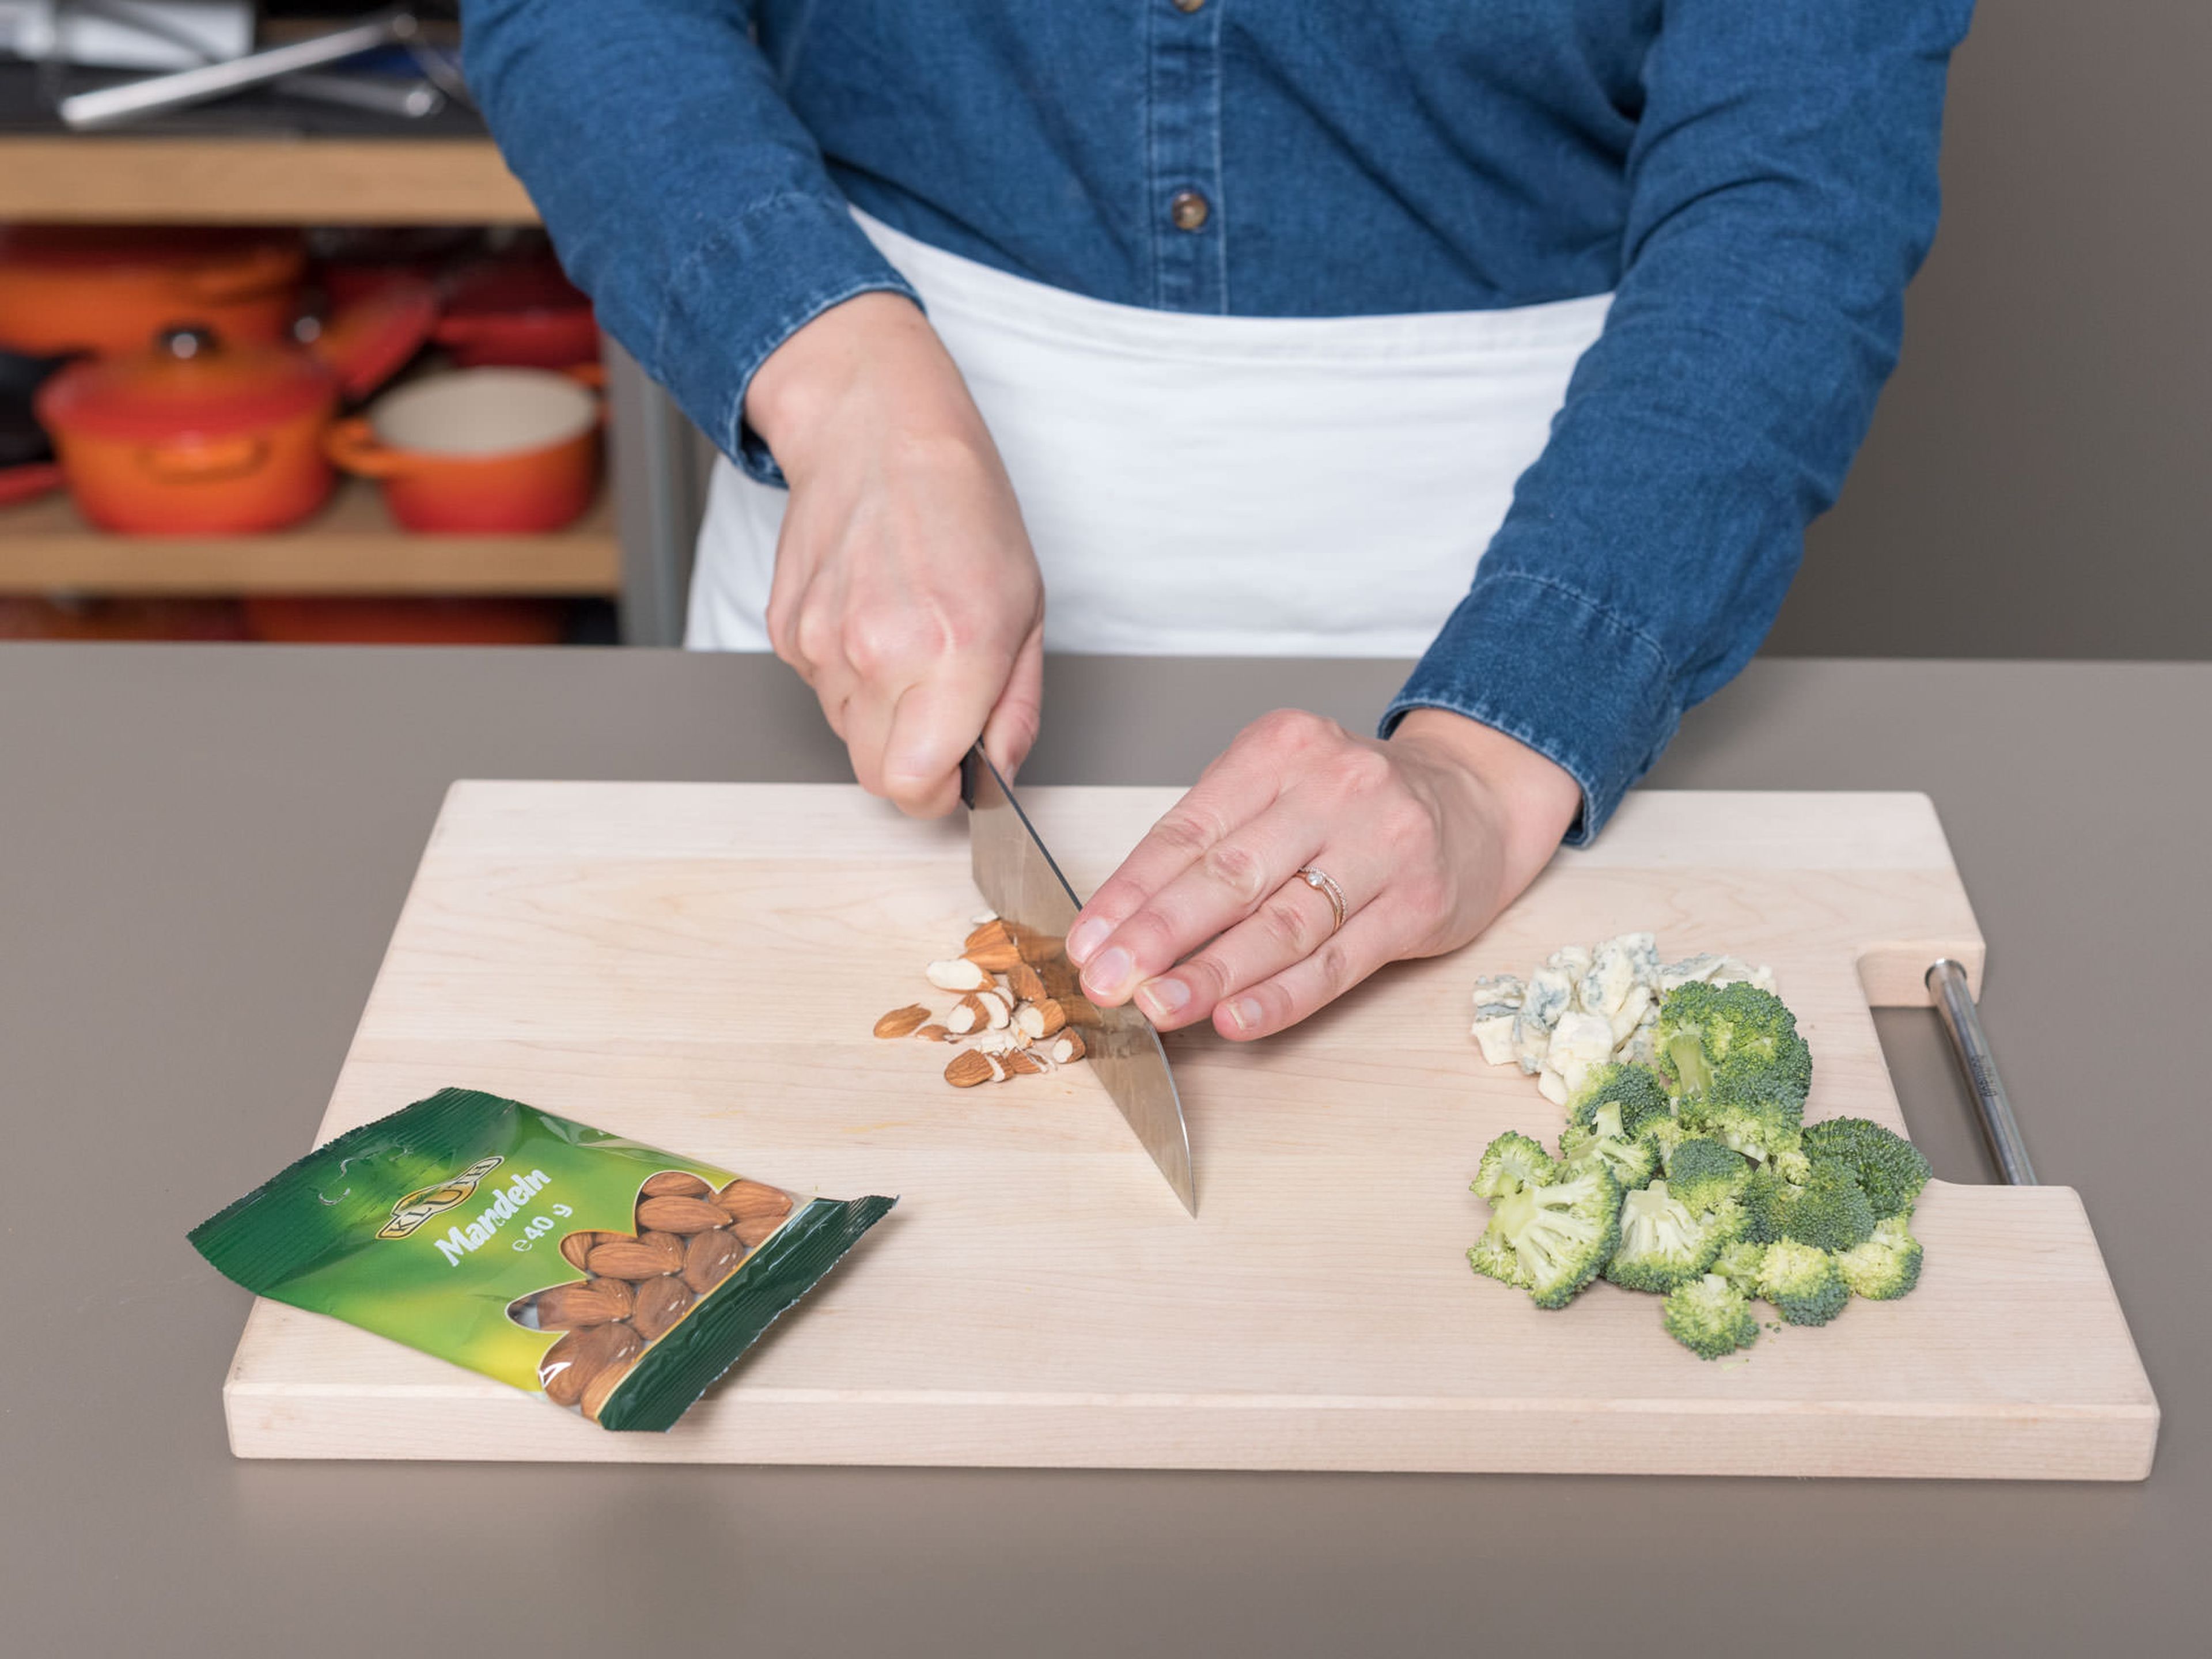 Preheat oven to 230°C/450°F. Roll out the pizza dough and place on a baking sheet lined with parchment paper, if needed. Wash broccoli, remove the stalk, and divide into small florets. Cut Gorgonzola into cubes and roughly chop almonds.